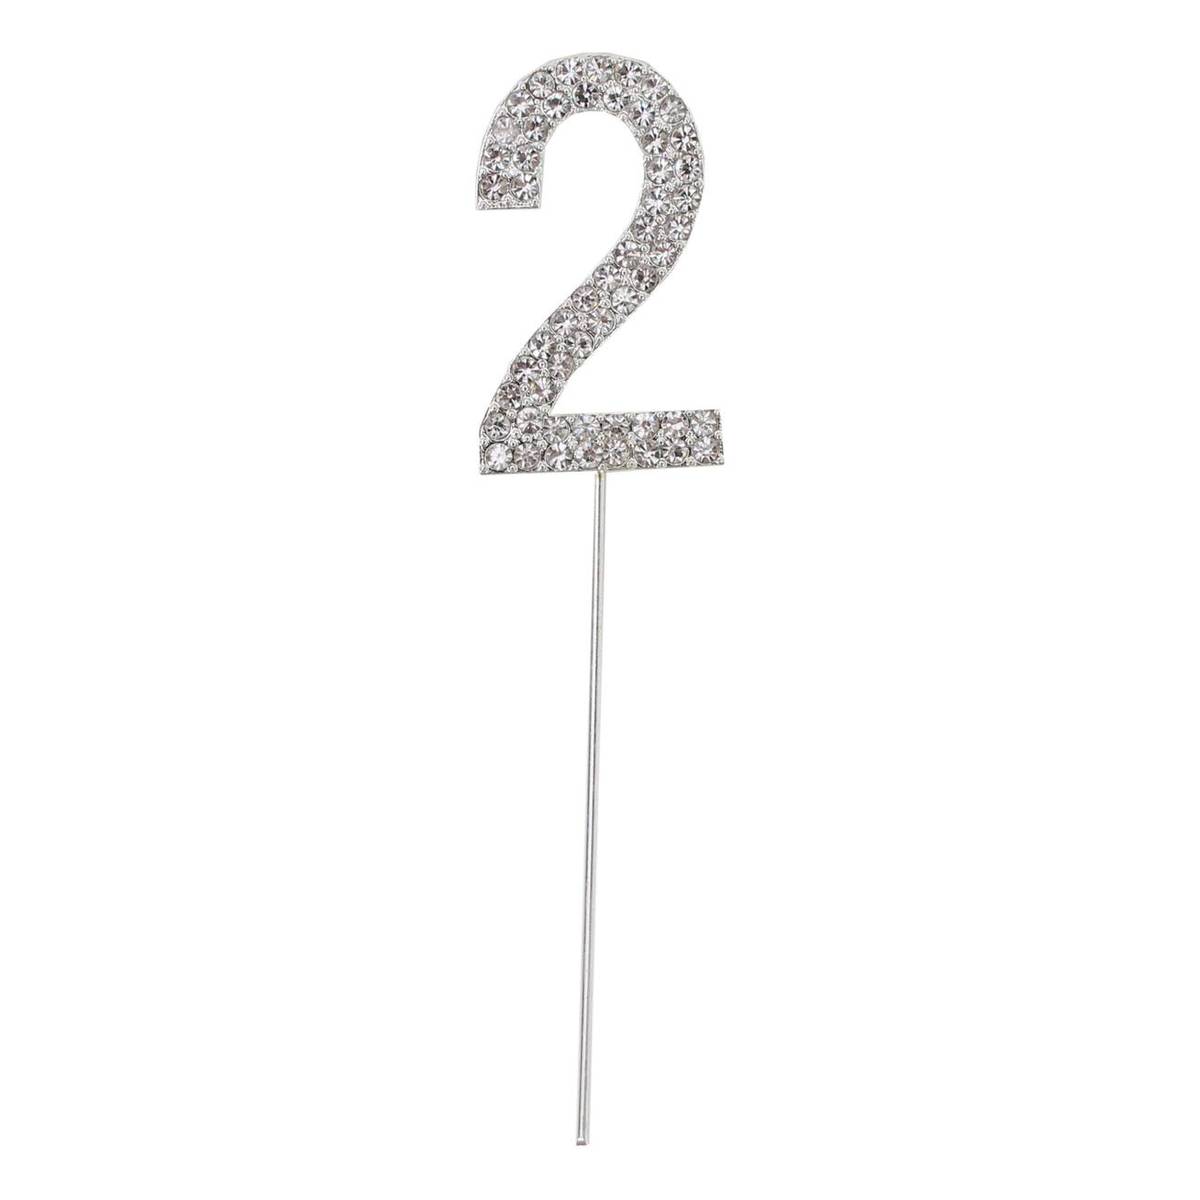 Two Cake Topper - 2nd Birthday Cake Decoration | SugarBooCakeToppers